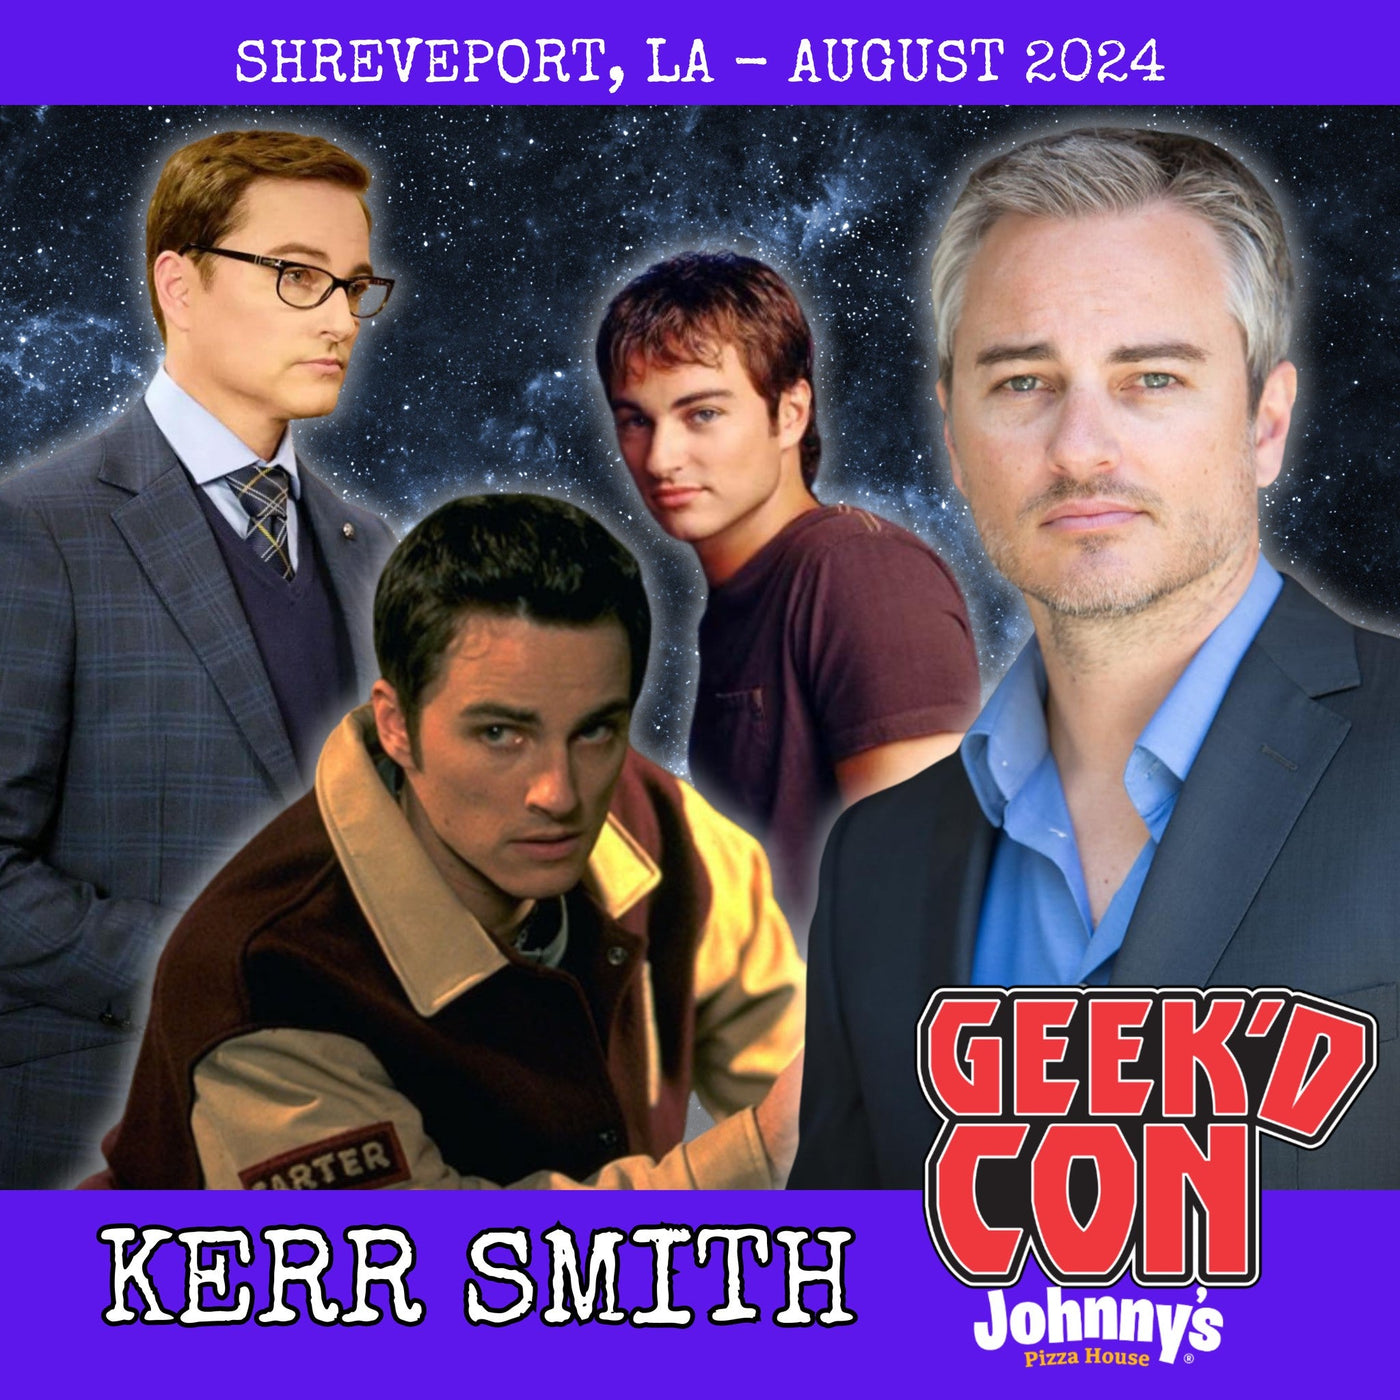 Kerr Smith Official Autograph Mail-In Service - Geek'd Con 2024